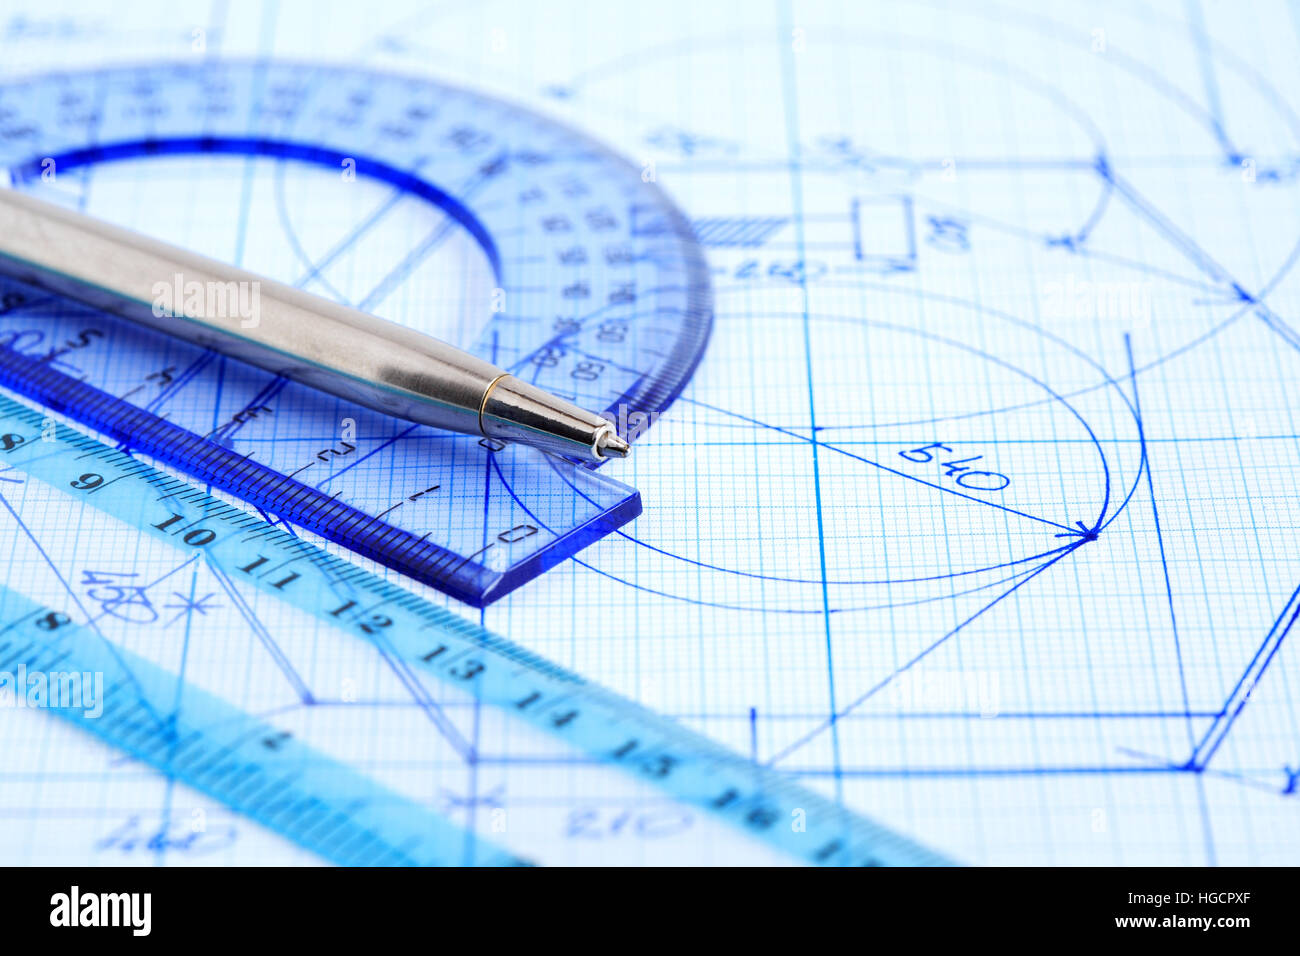 Business concept. Closeup of pen near rulers on graph paper with draft Stock Photo